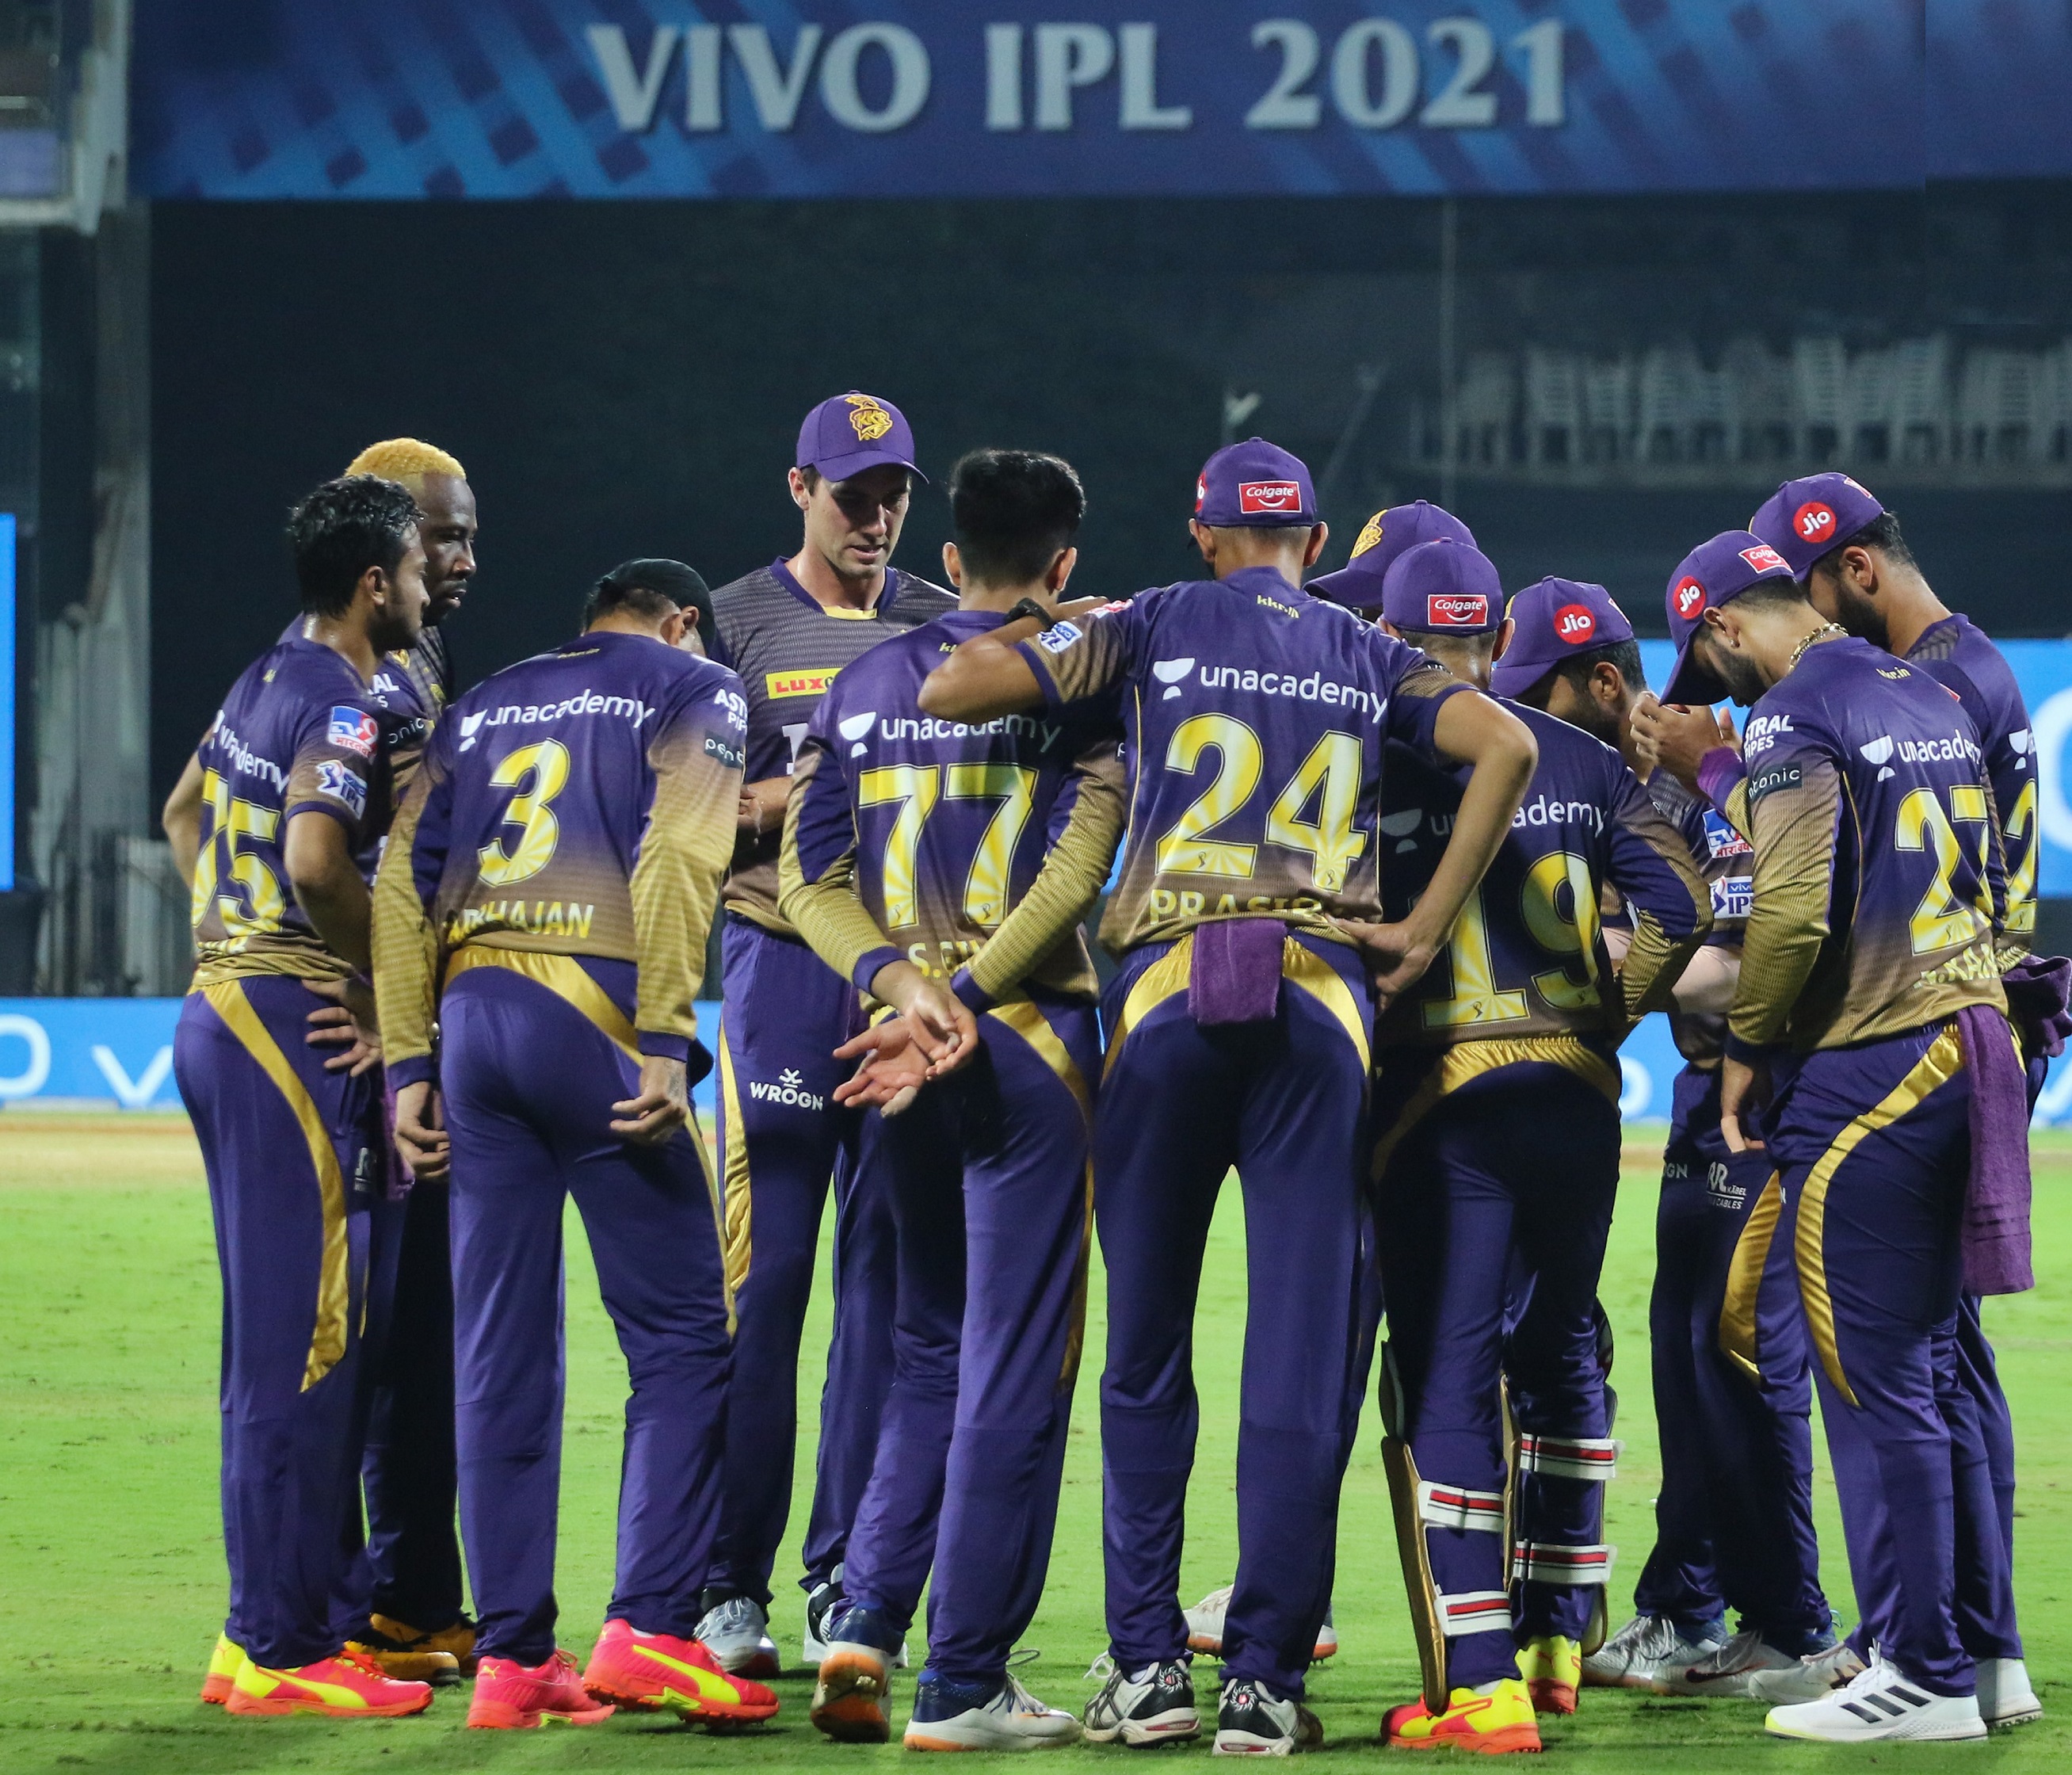 Kolkata started off with a win in IPL 2021 | KKR Twitter